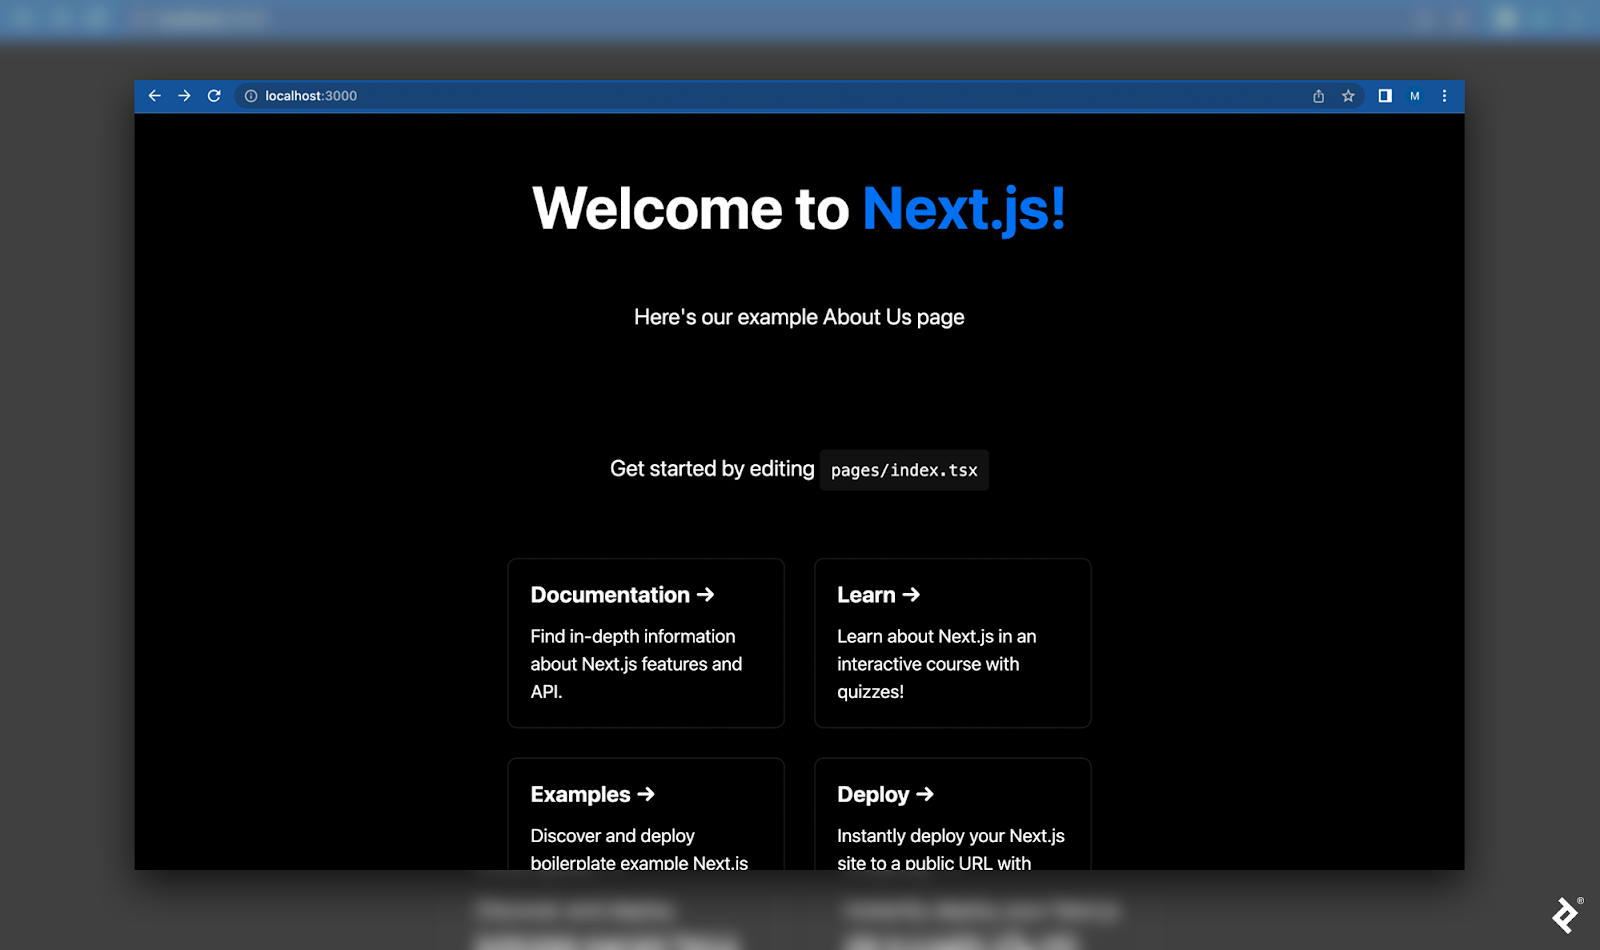 The Next.js website template displayed at “localhost:3000,” with an added description below “Welcome to Next.js!”: “Here’s our example About Us page.”